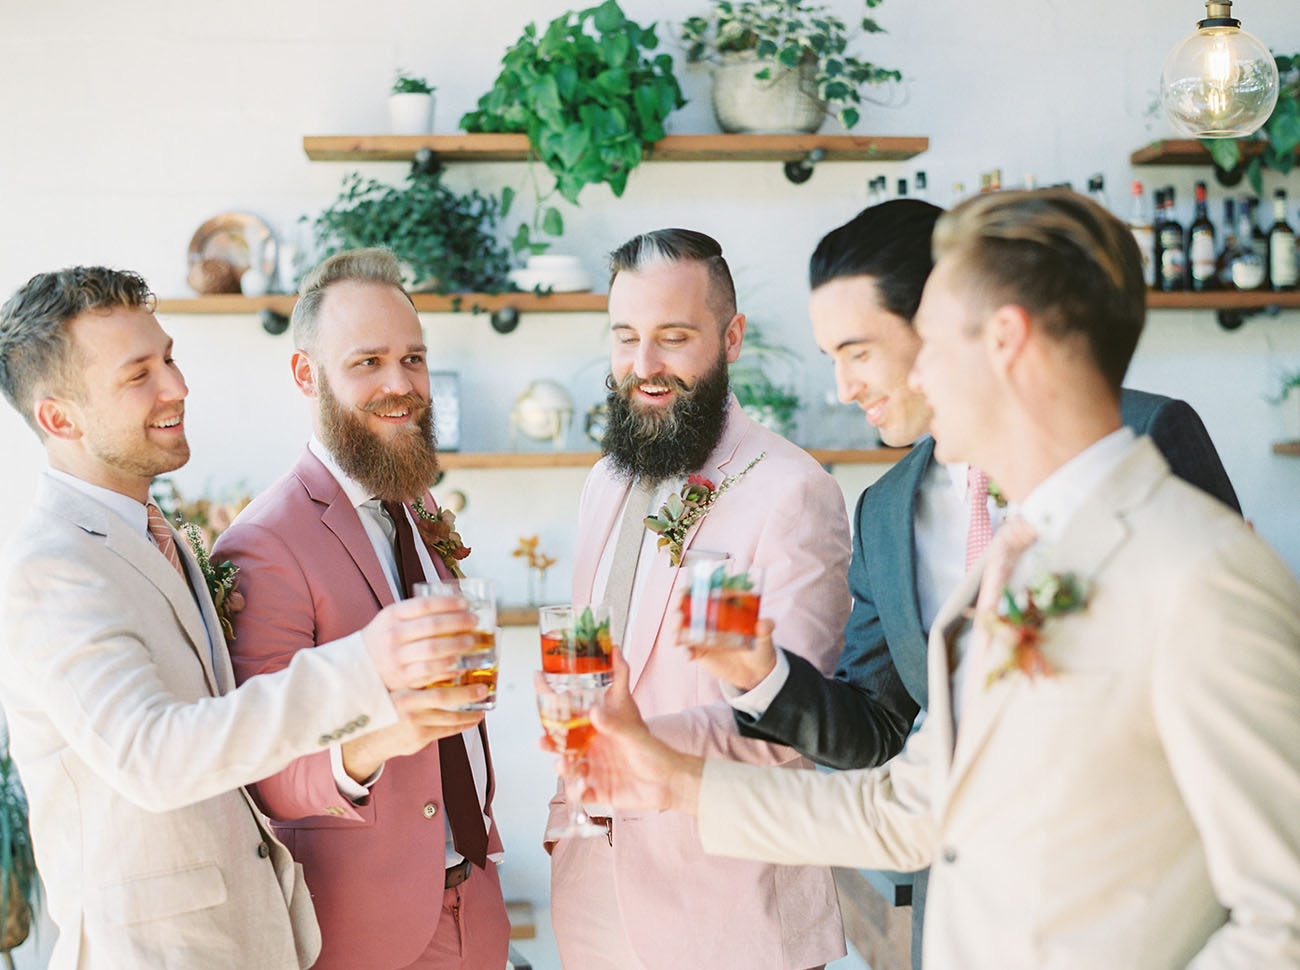 Lovely cocktails and shooters were created right for this wedding shoot